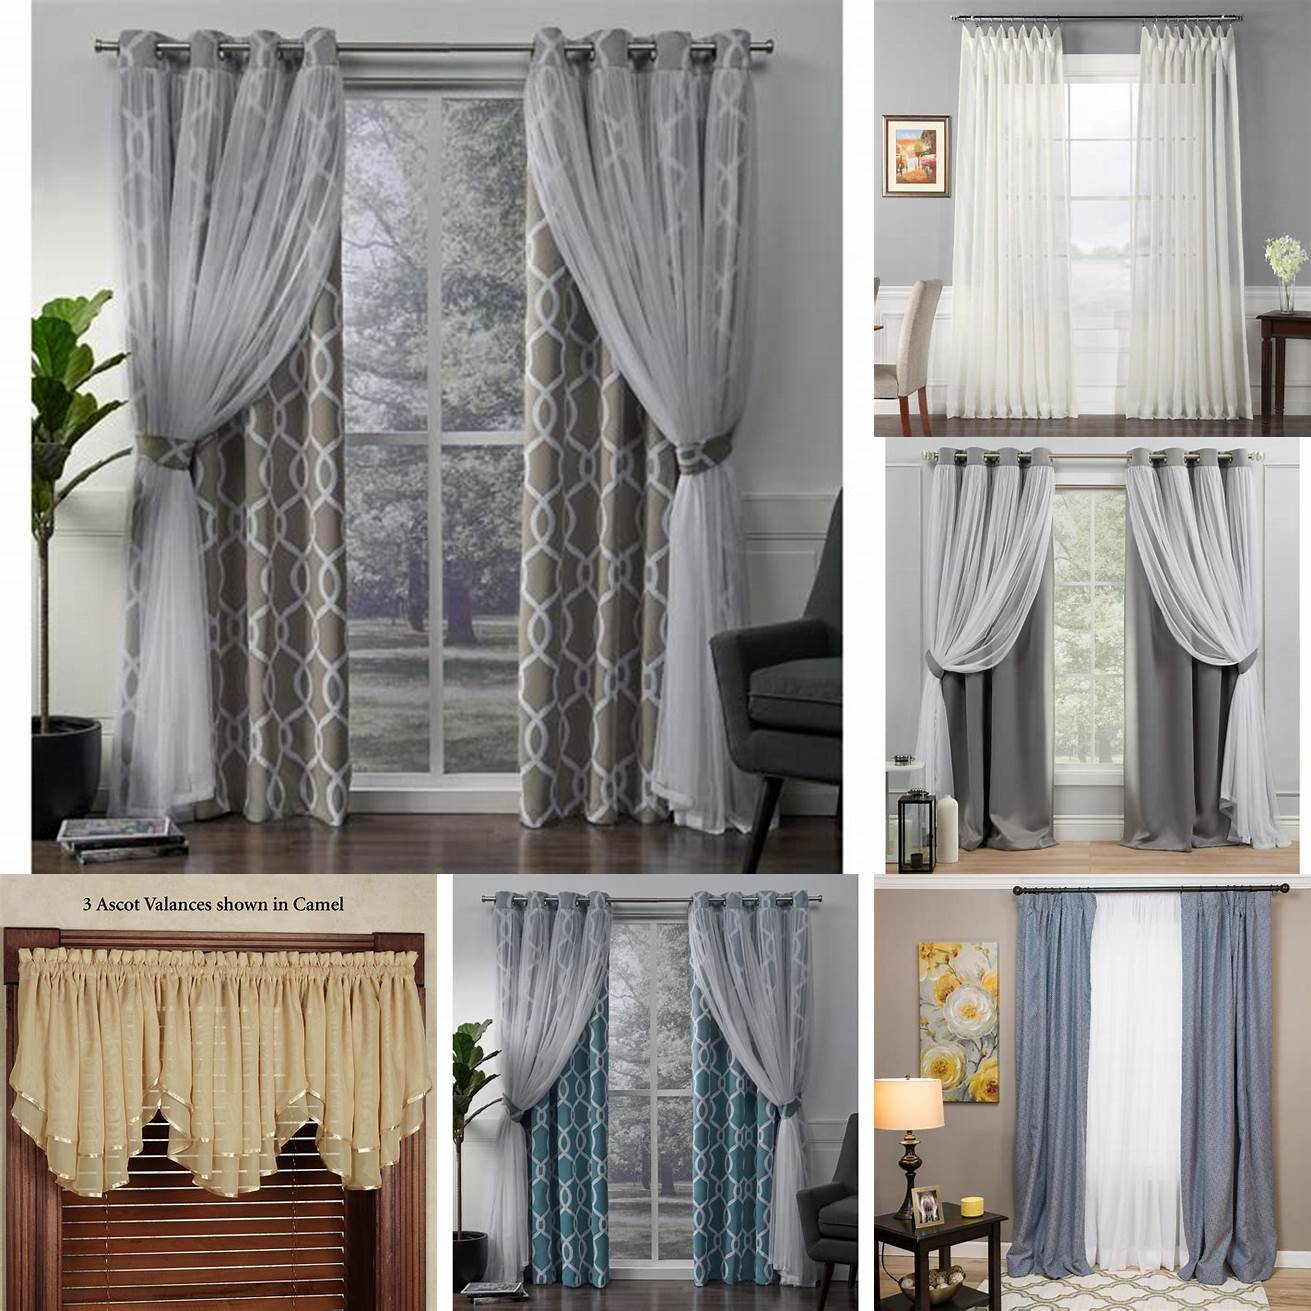 Layered valances with sheer curtain